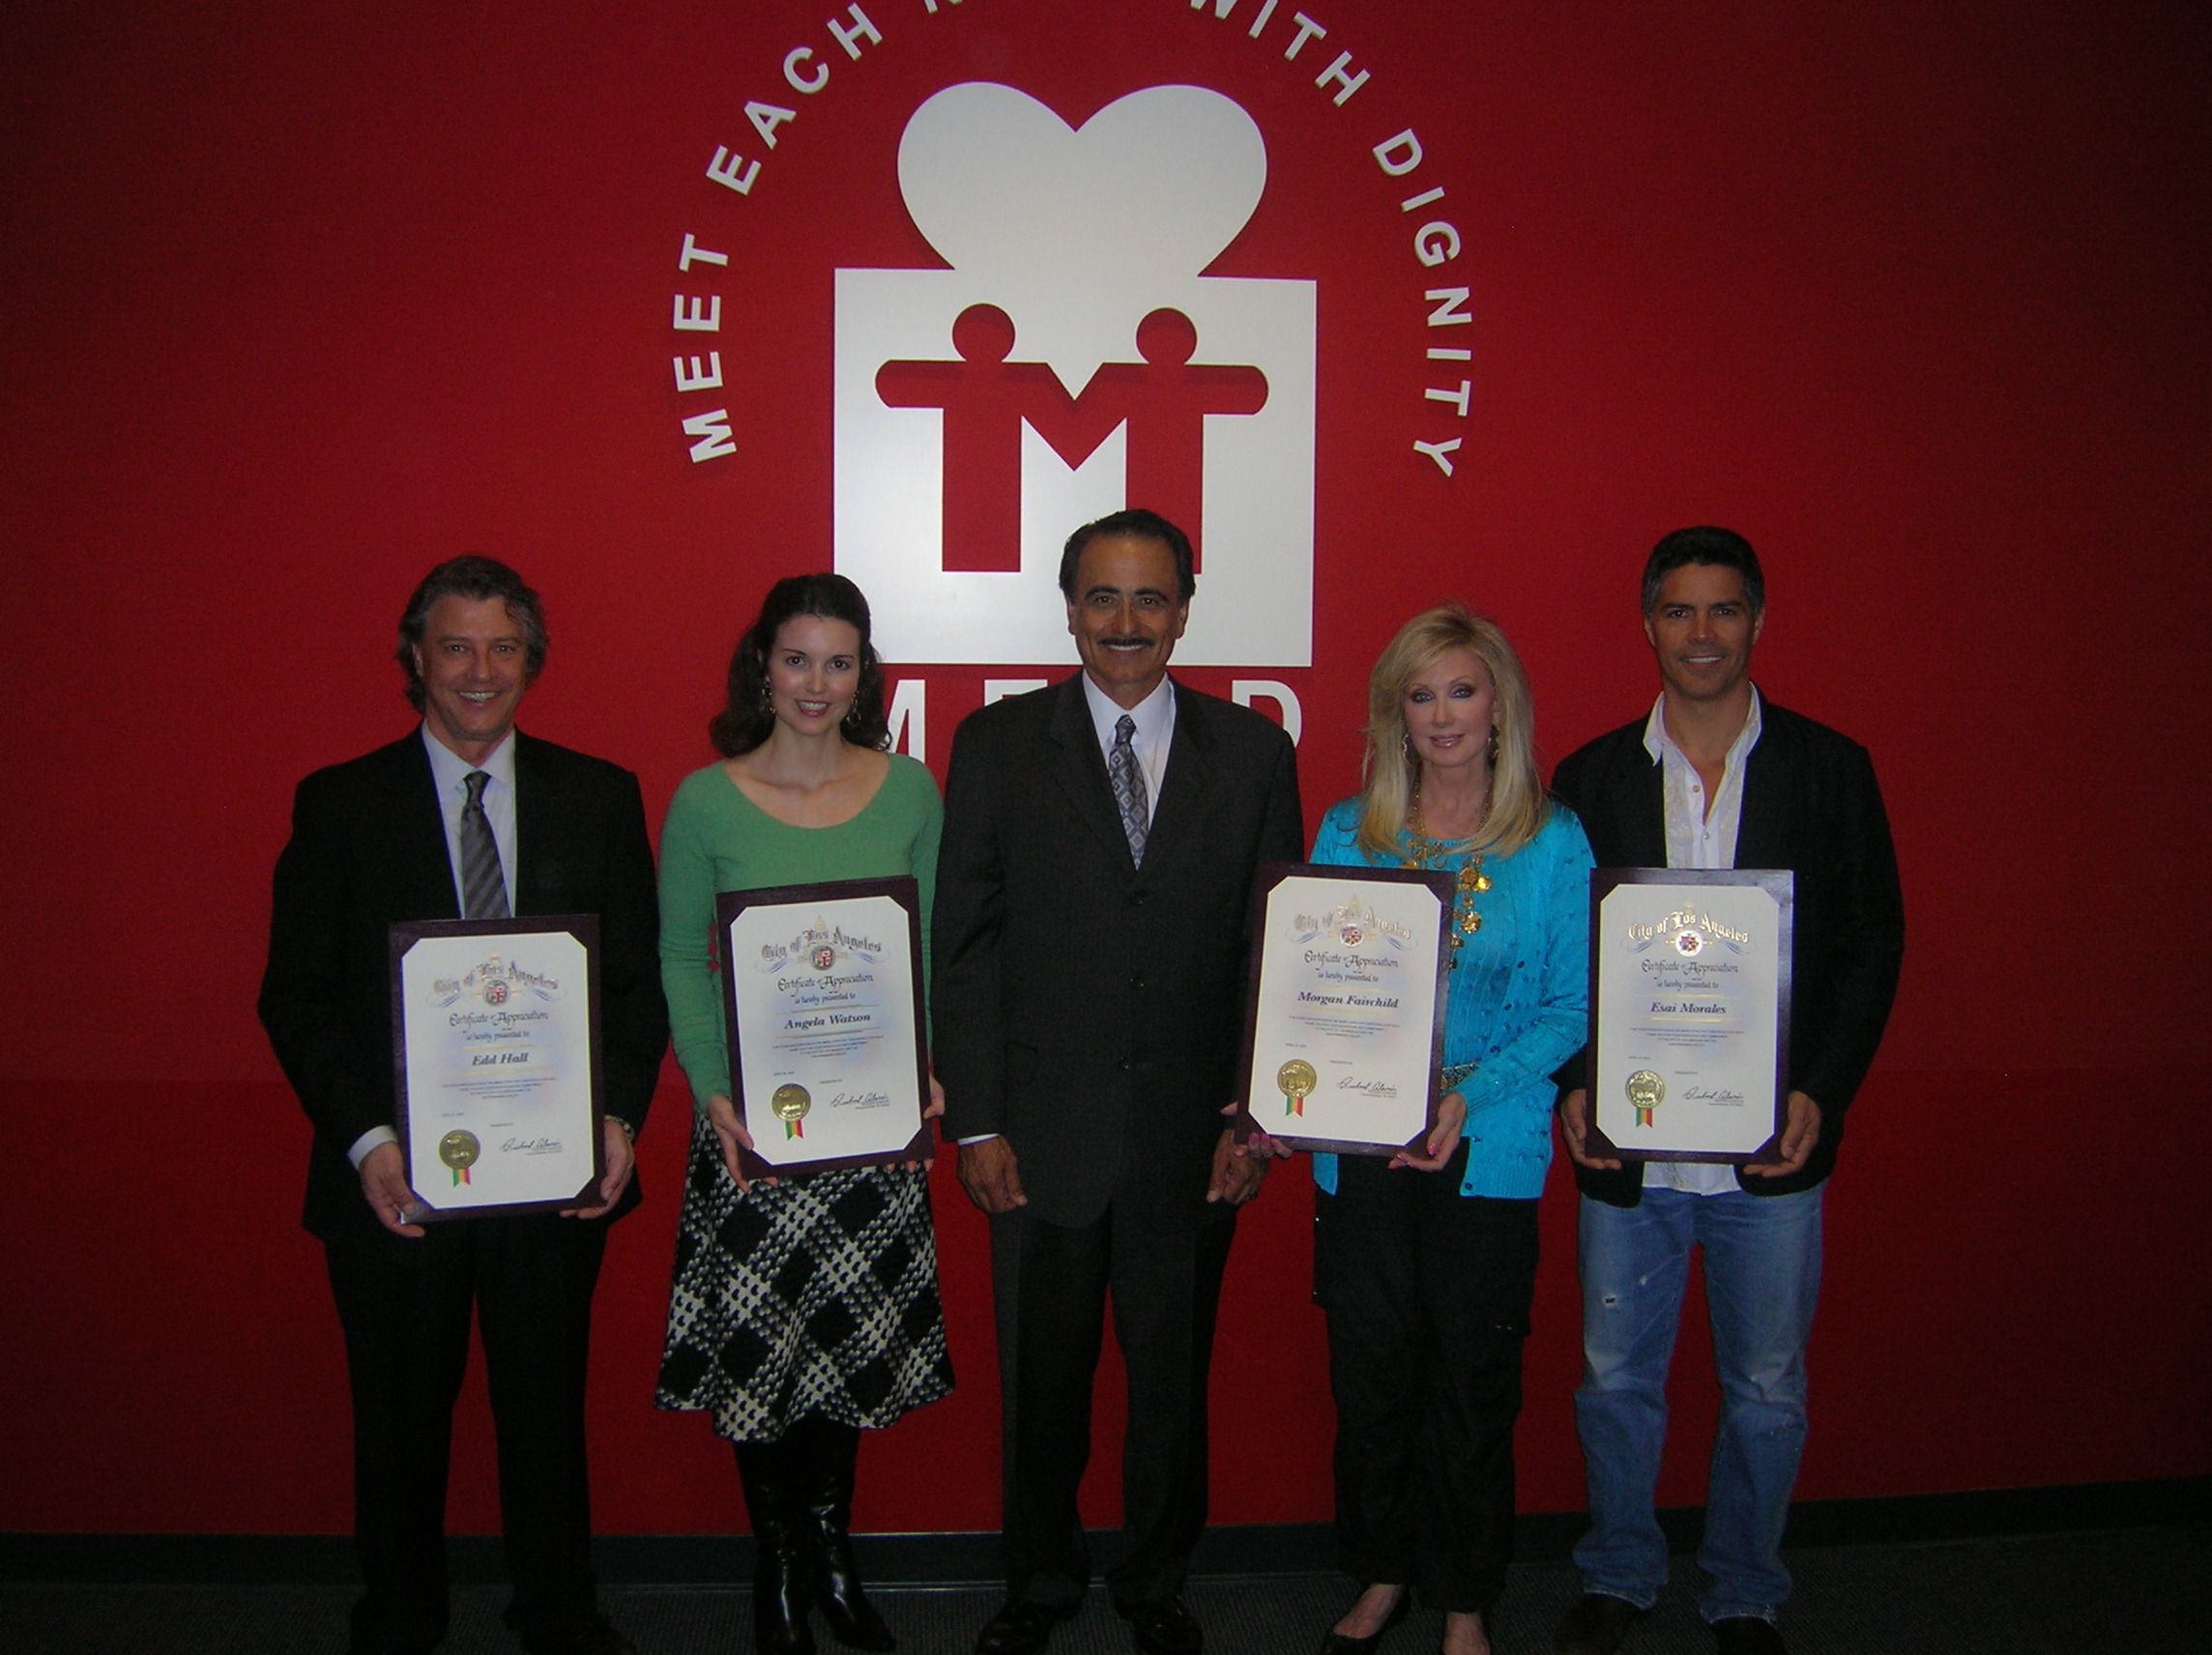 Edd Hall, Angela Watson, Morgan Fairchild and Esai Morales receive Citations for their work with the MEND organization by LA City Councilman Richard Alarcon.